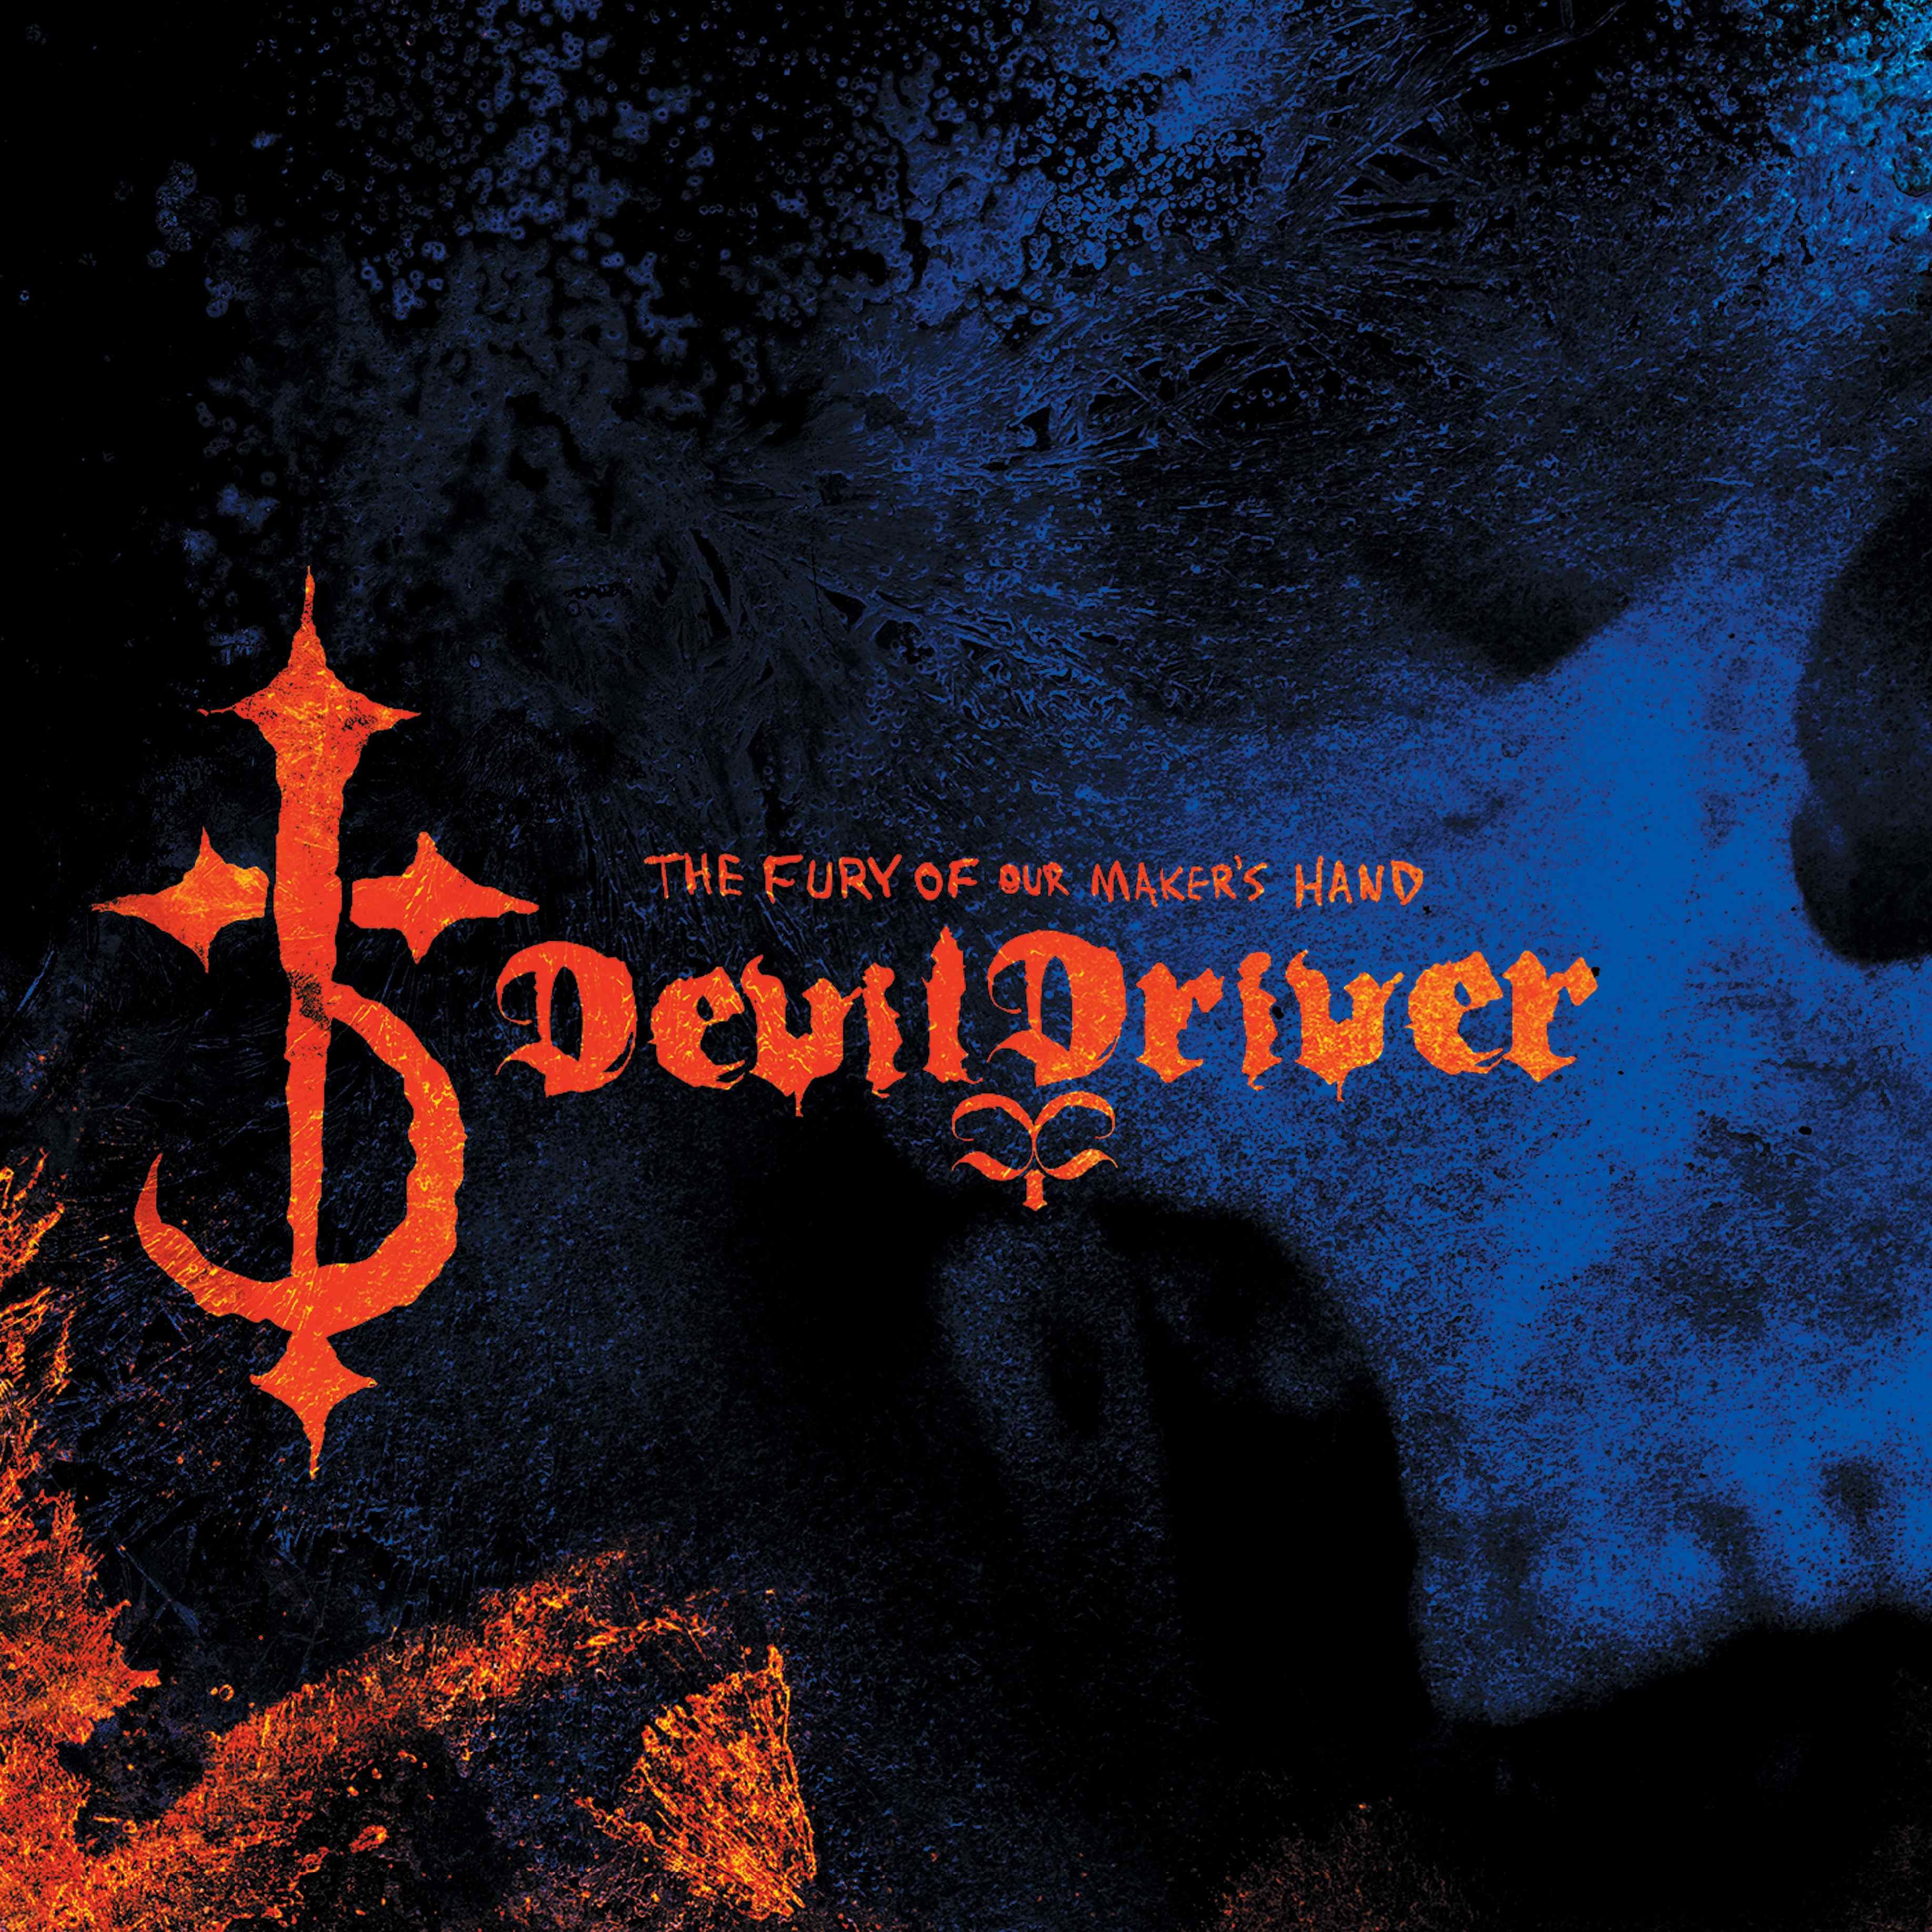 DevilDriver-The Fury Of Our Makers Hand-(BMGCAT239CD)-REMASTERED-CD-FLAC-2018-WRE